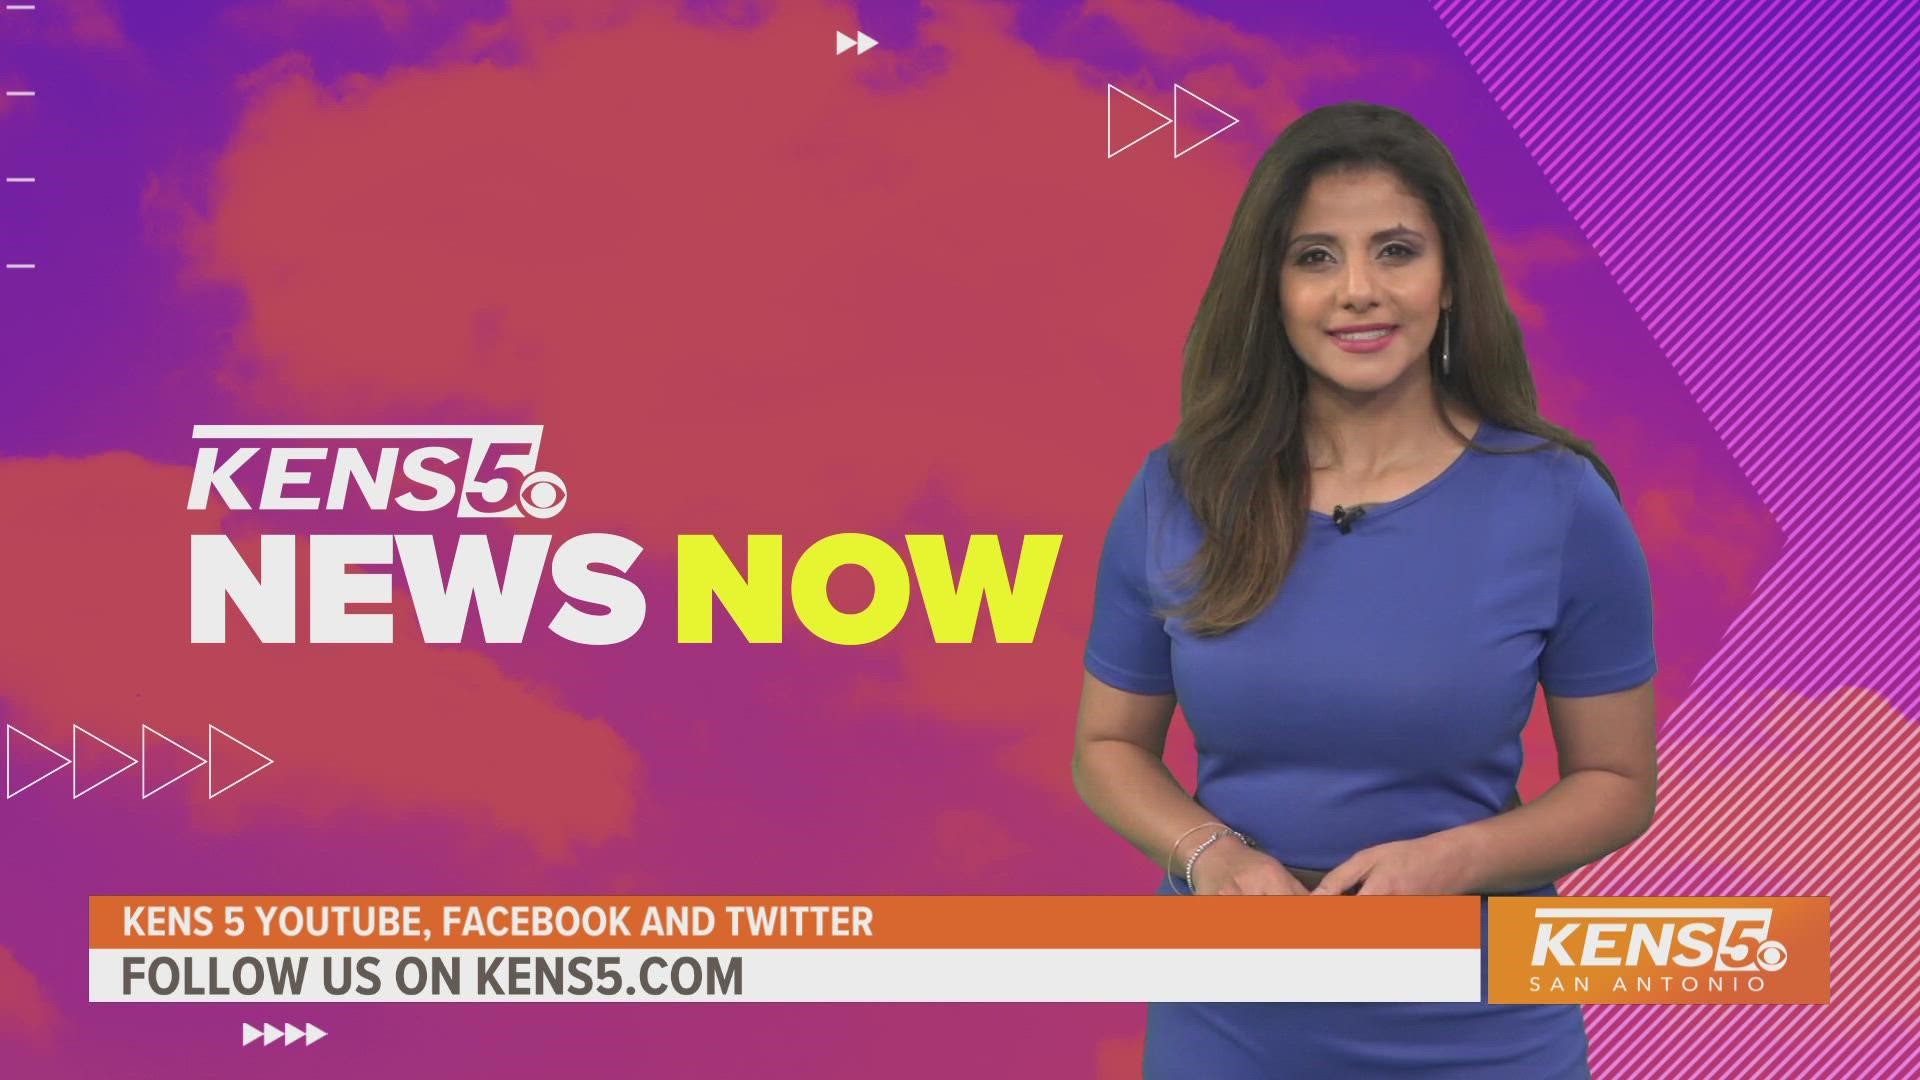 Follow us here to get the latest top headlines with KENS 5's morning show every weekday.